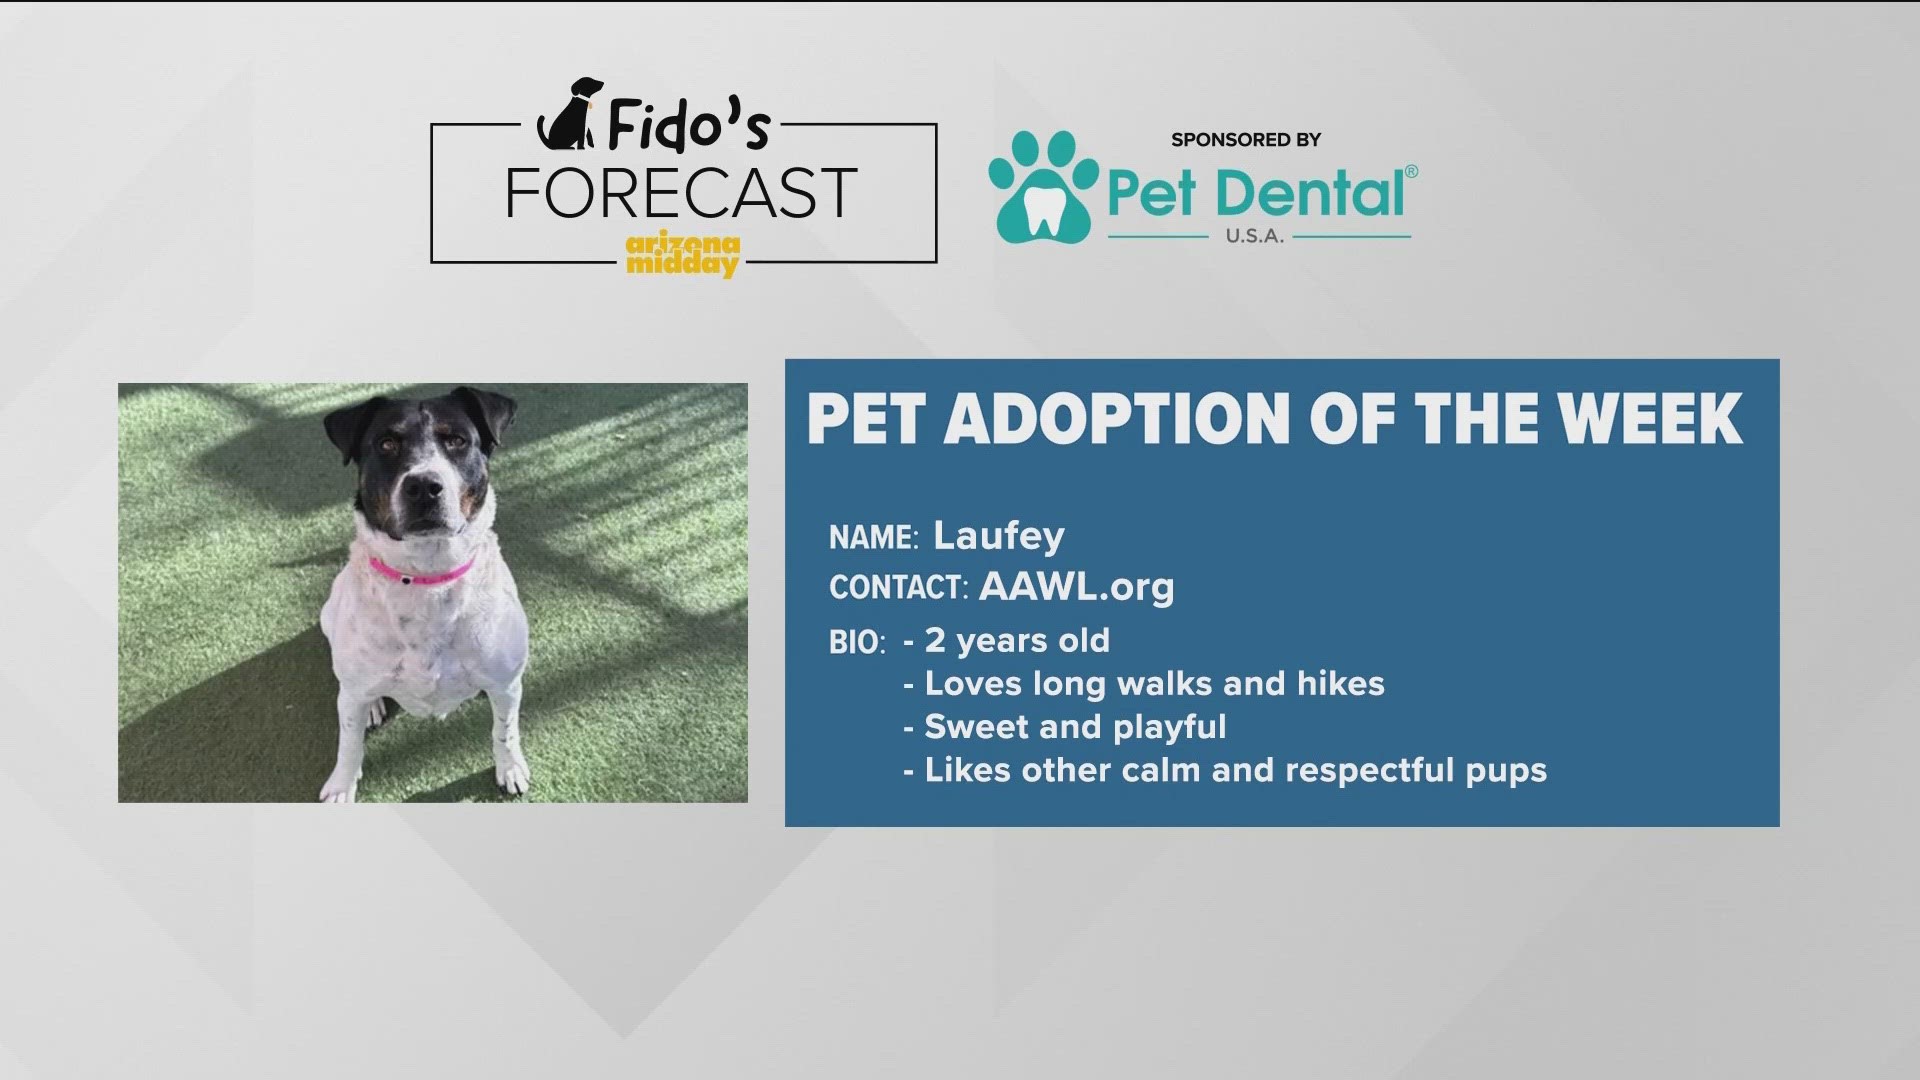 Arizona Animal Welfare League brought two-year-old Laufey to help find her “furever” home and to assist Krystle with this weekend's Fido's Forecast.